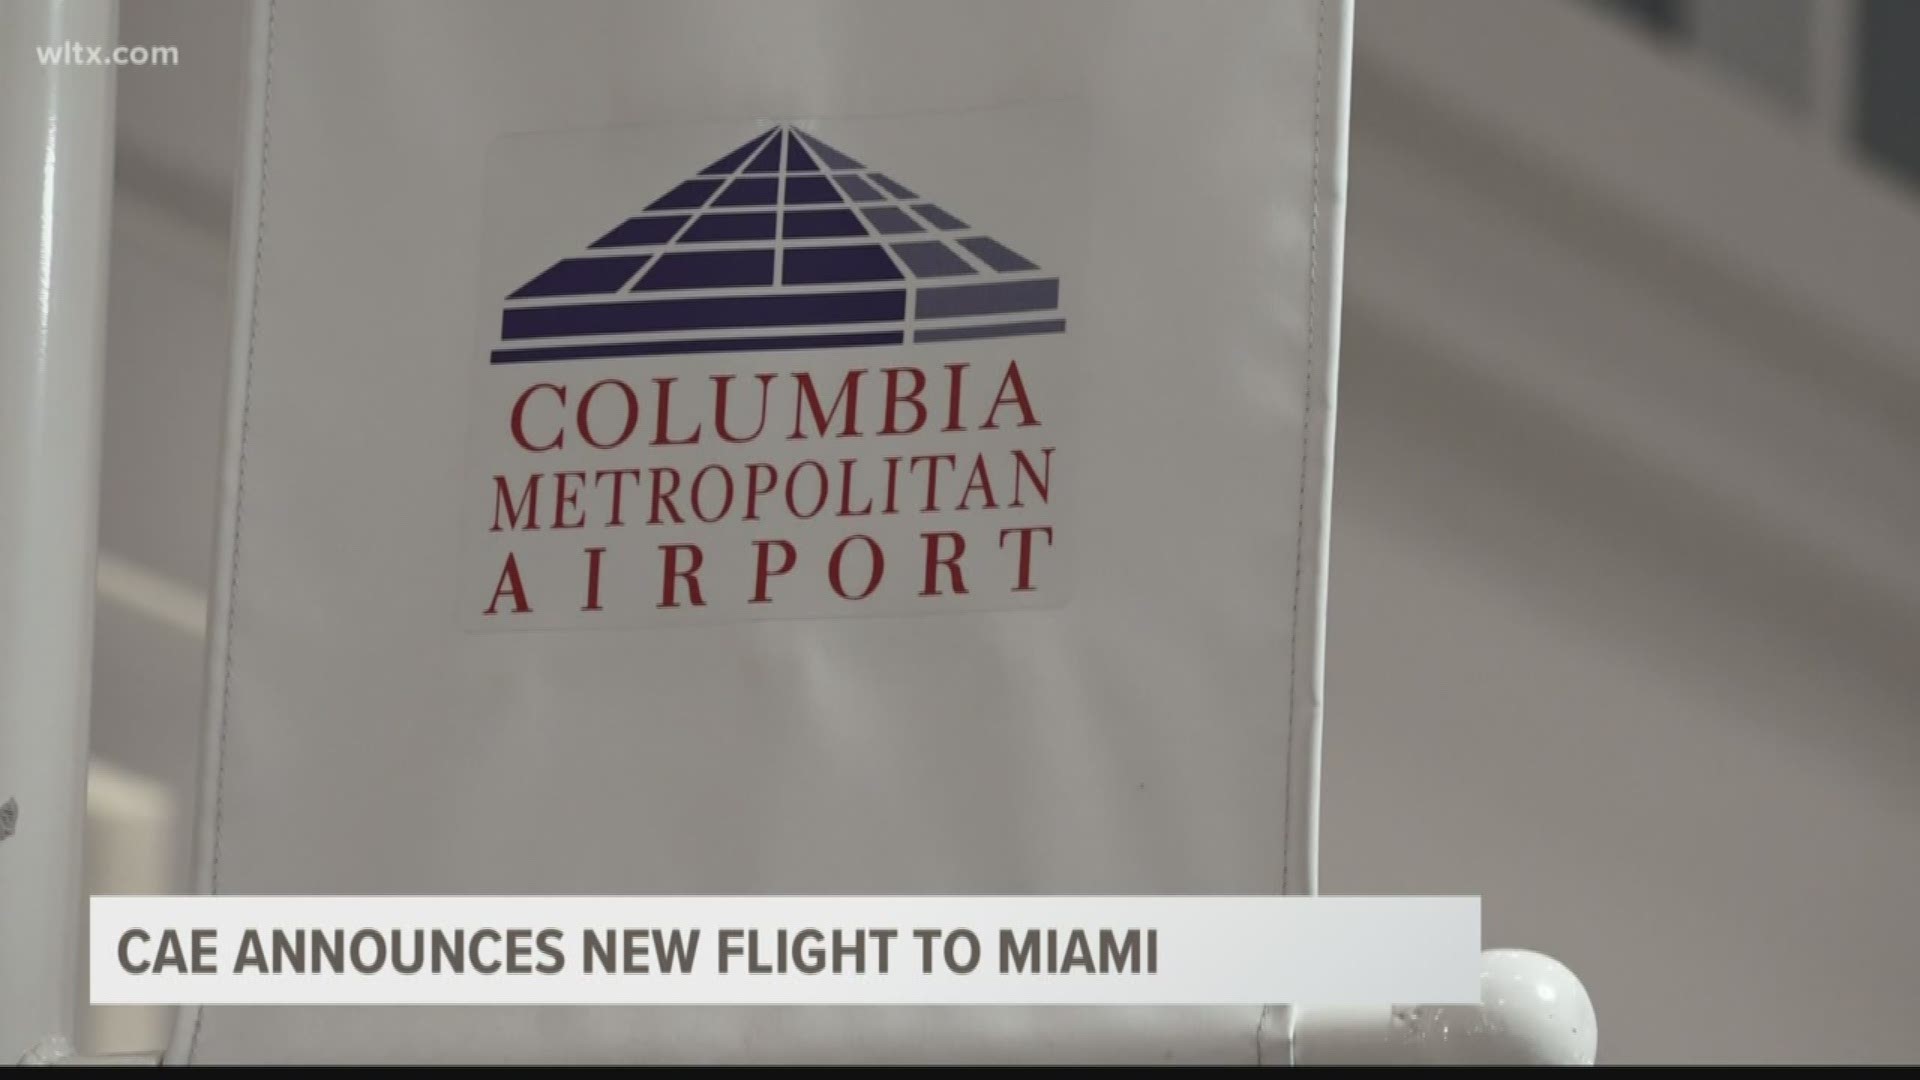 The Columbia Metropolitan Airport (CAE) announced Friday that American Airlines will now offer a nonstop flight from Miami to Columbia beginning December 18.